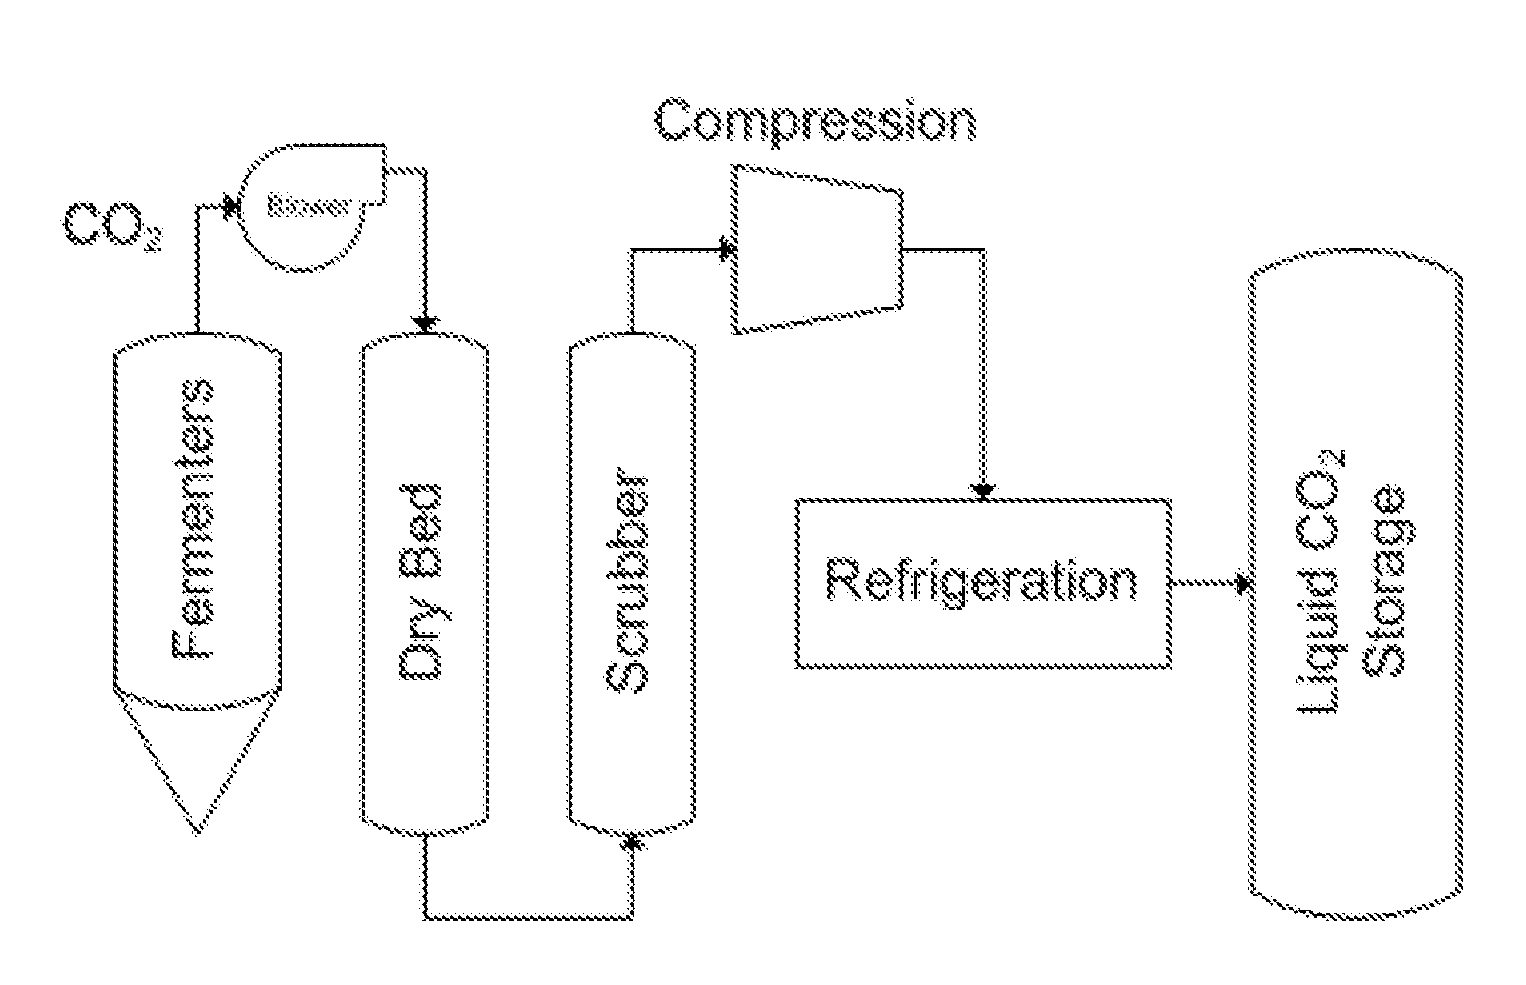 Systems and methods for recovering carbon dioxide from industrially relevant waste streams, especially ethanol fermentation processes, for application in food and beverage production